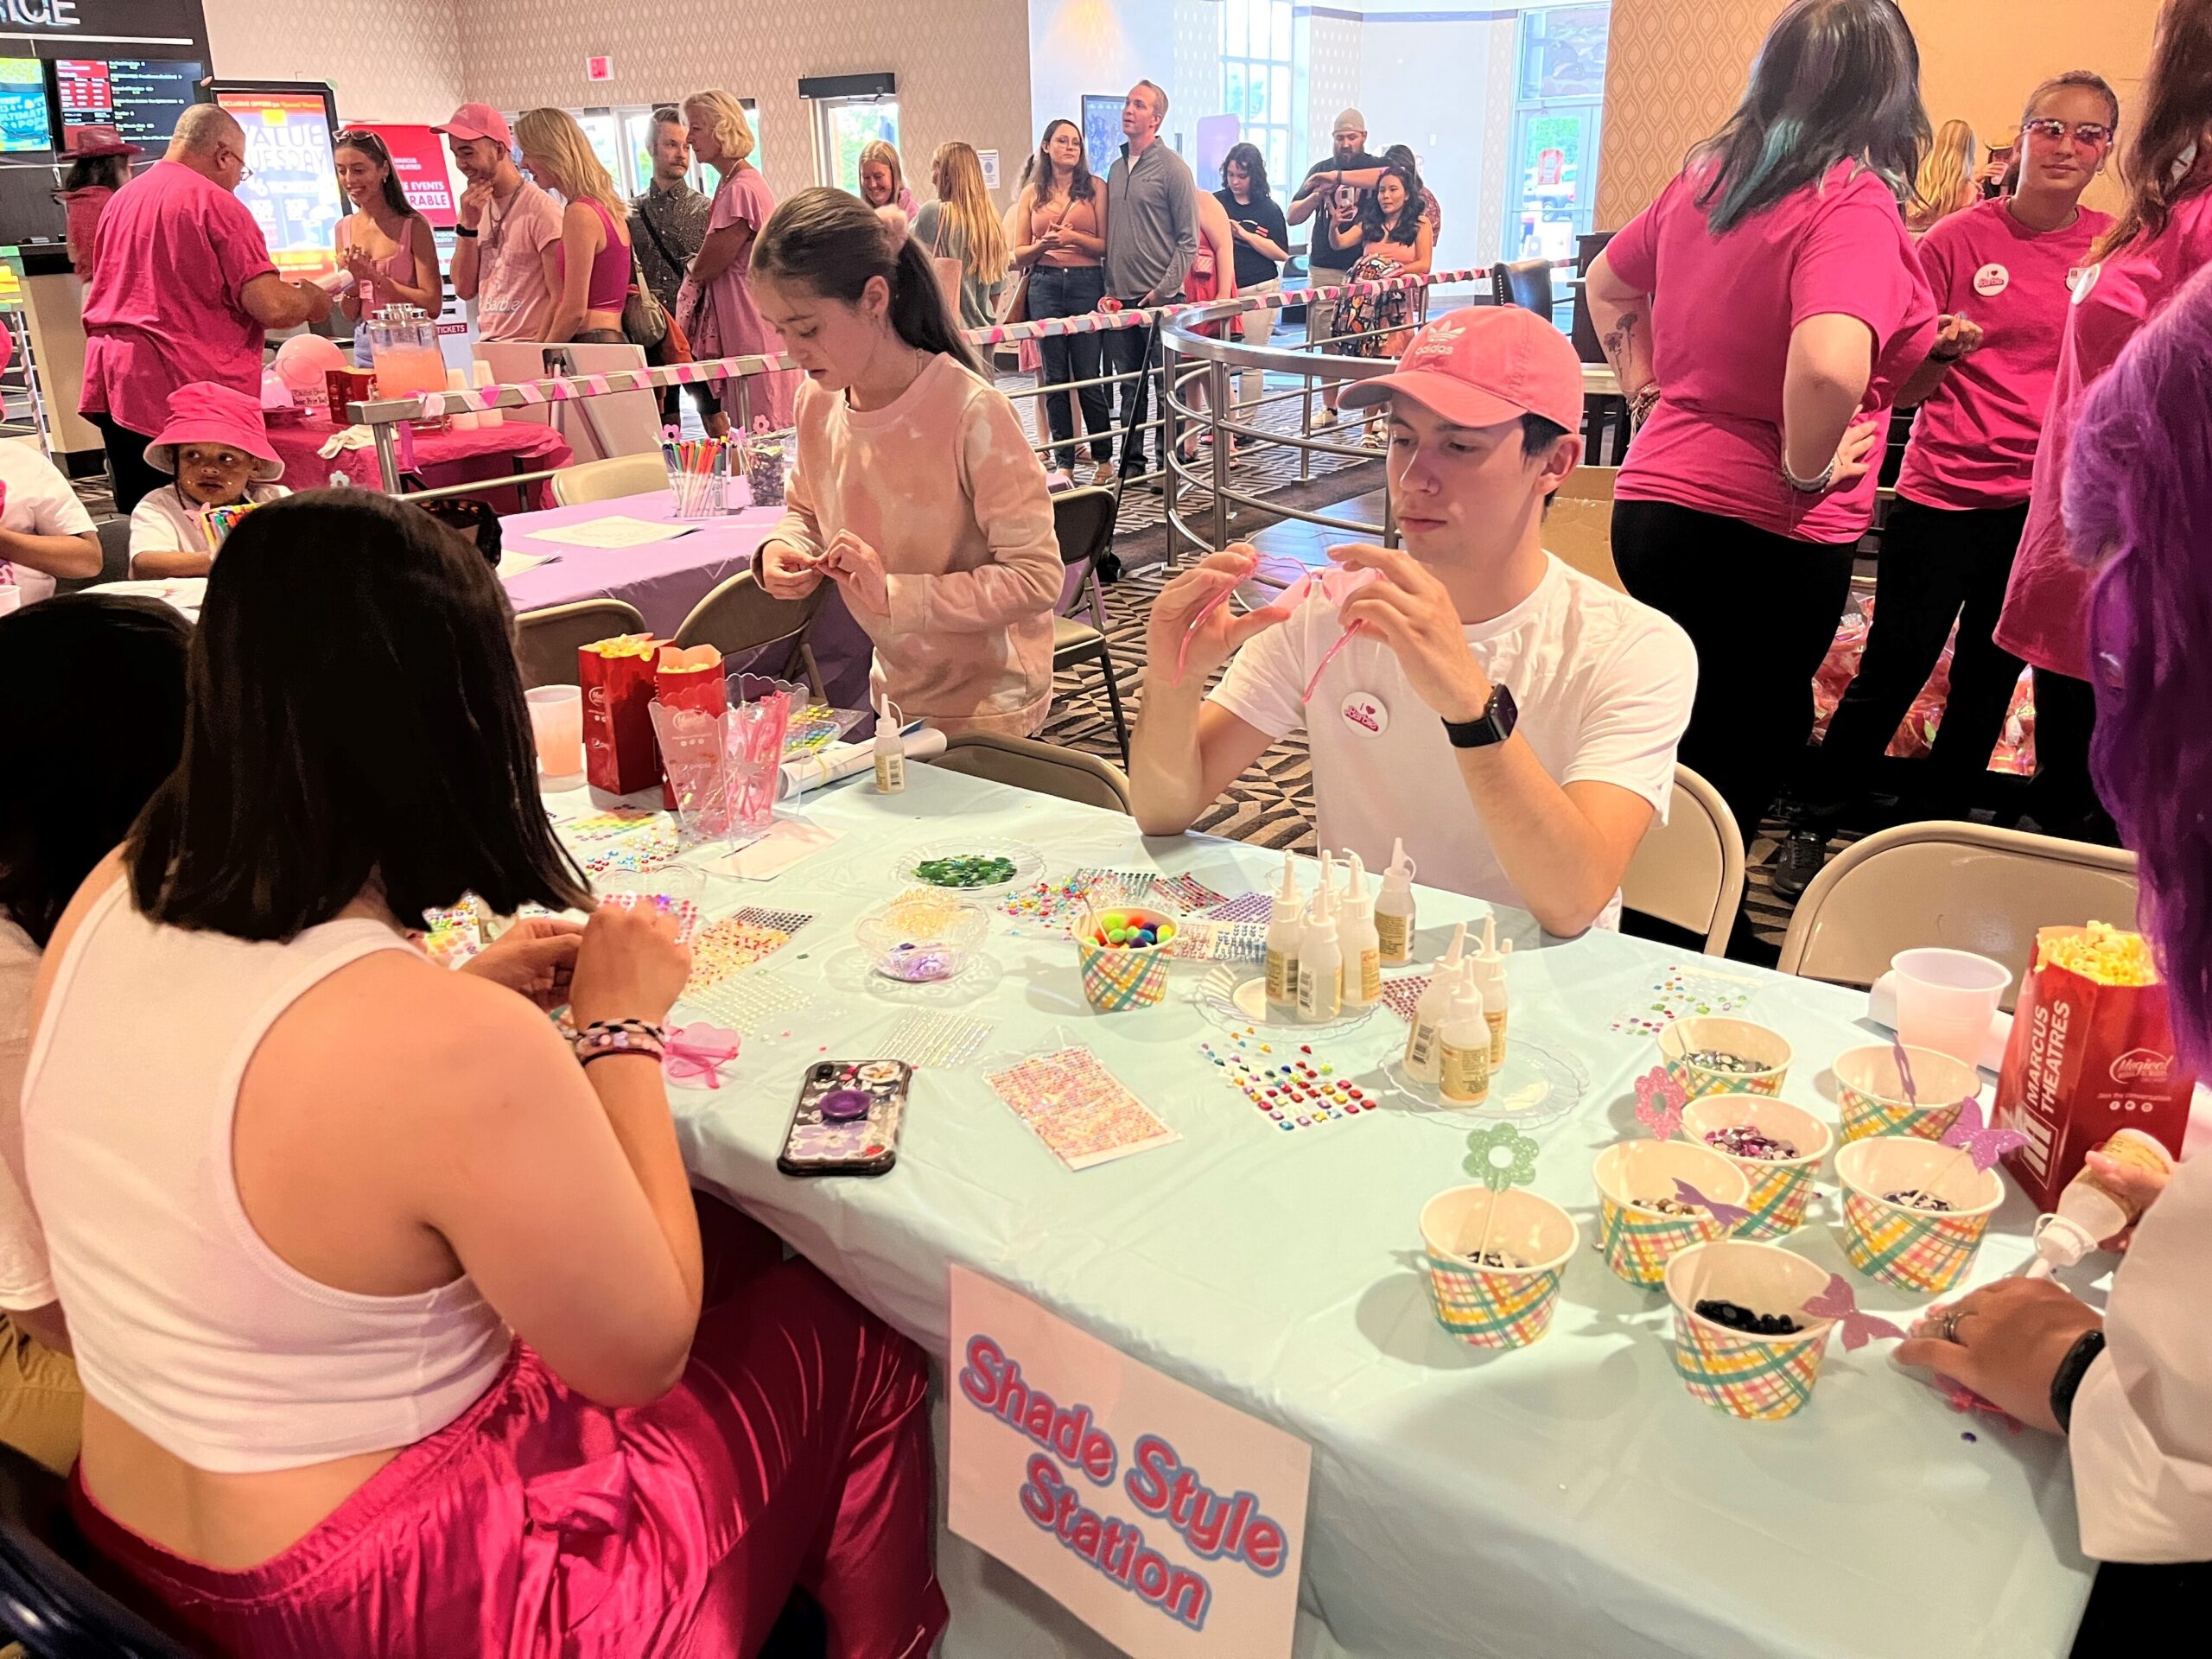 People make crafts at a "Barbie" Blowout party held by Marcus Theatres, with an advanced screening on Wednesday.